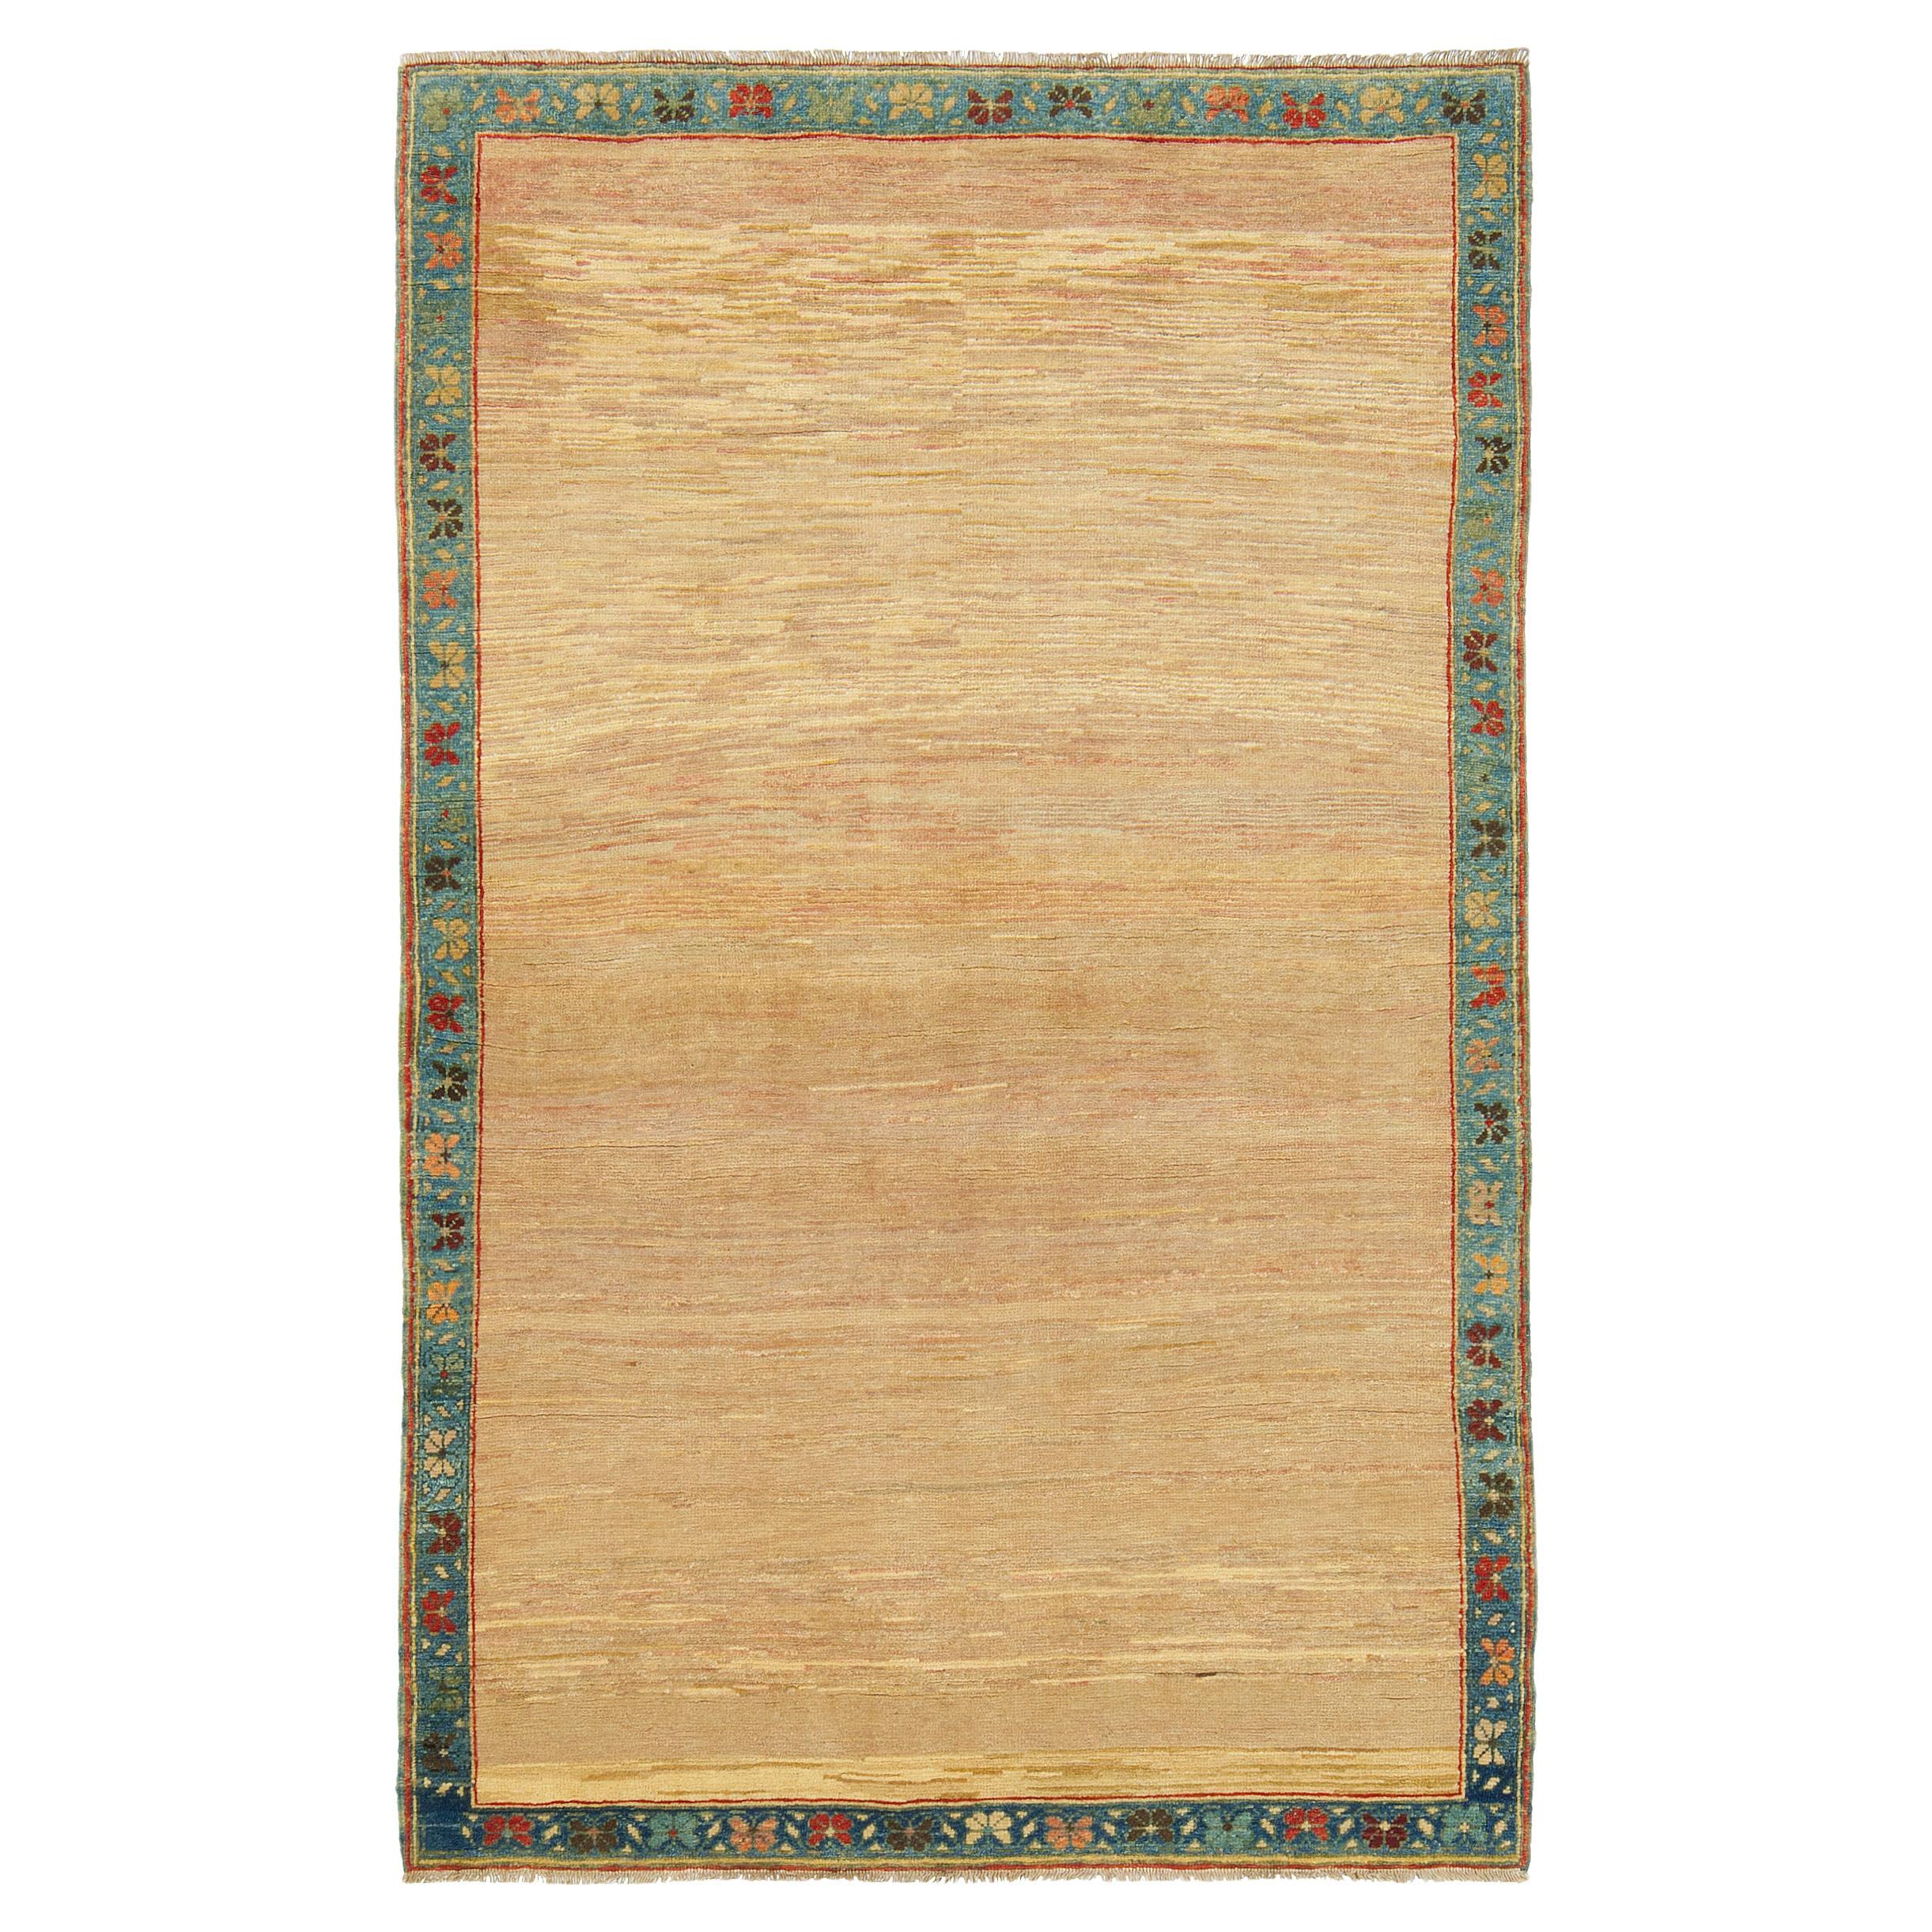 Ararat Rugs the Yellow-Brown Color Rug, Modern Desert Sand Carpet Natural Dyed